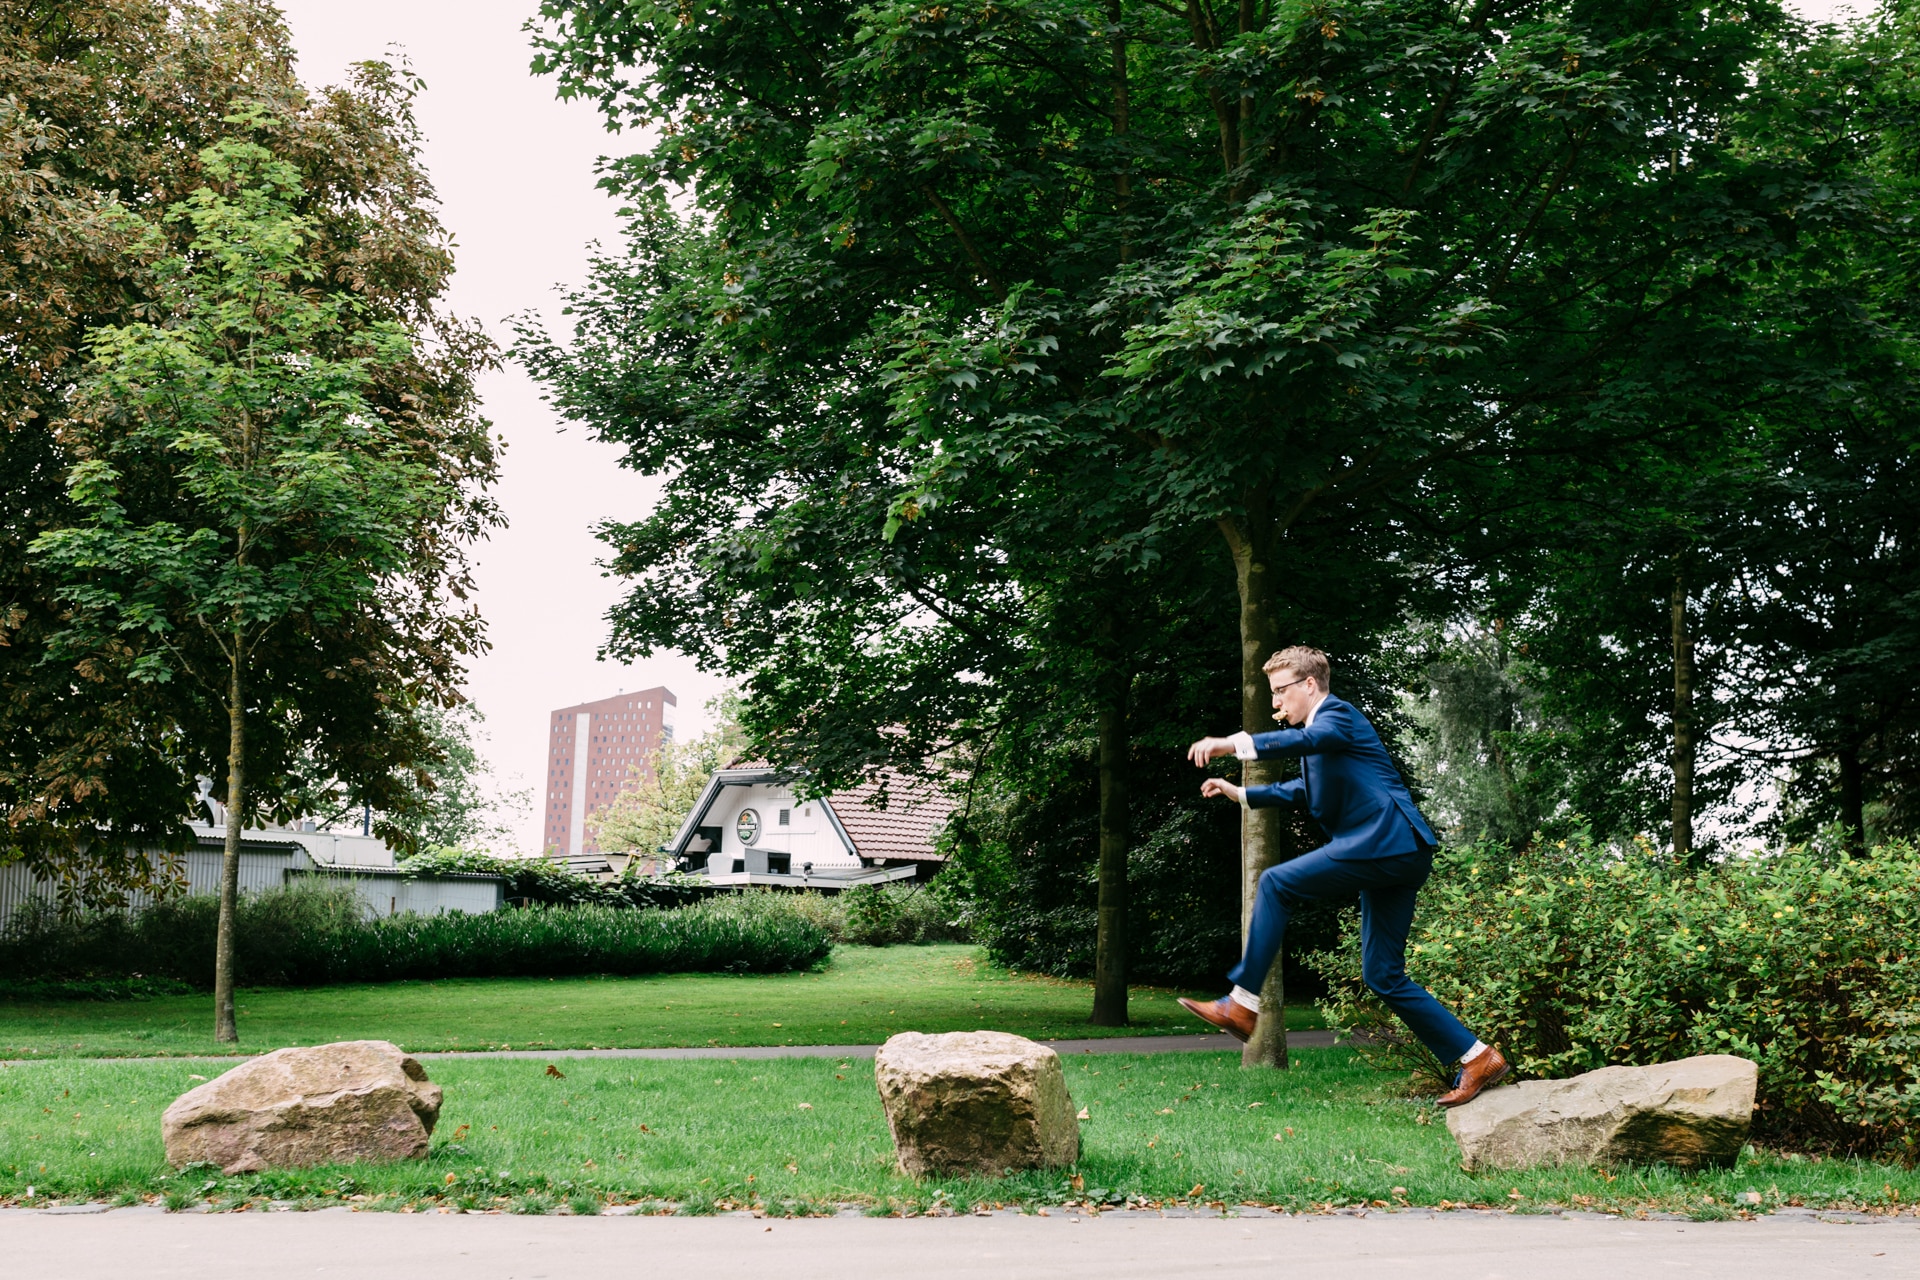 A man in a suit jumps over rocks in a park during Weddings in the Woods.